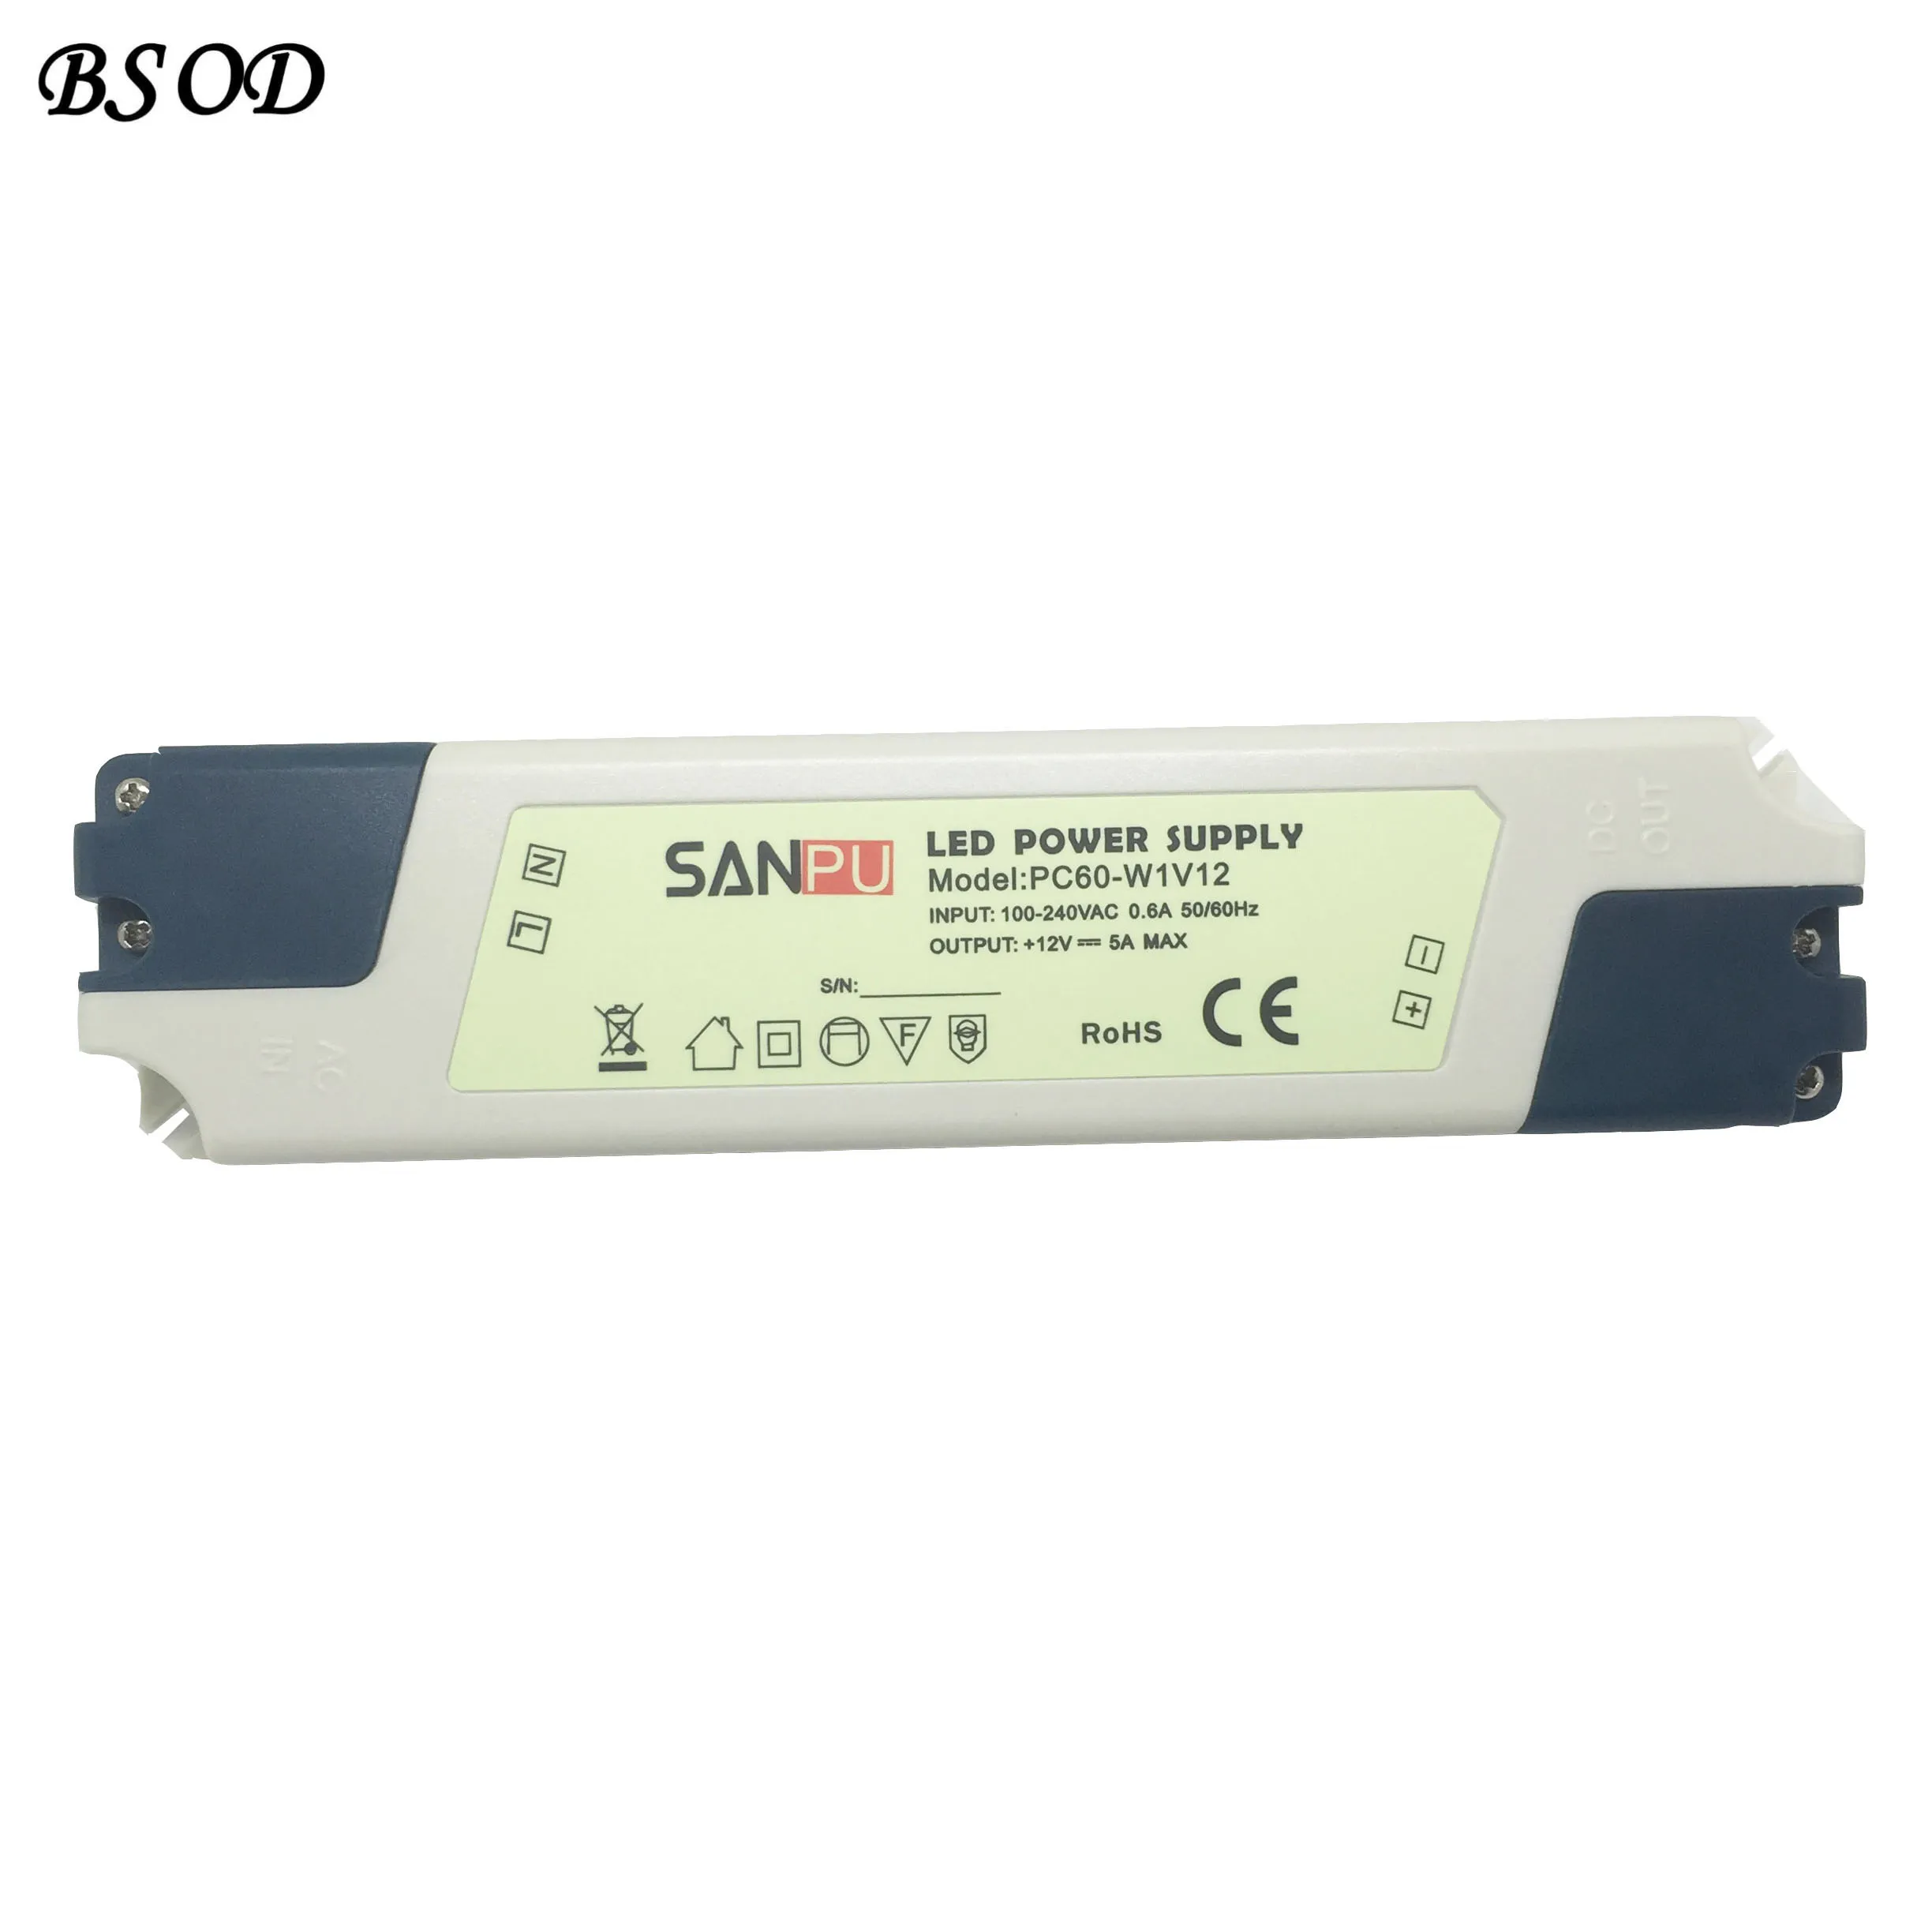 SANPU PC60-W1V12 LED Power Supply 12V 60W Transformer Max 5A Driver White Plastic Shell IP44 for Indoor LEDs Lamps